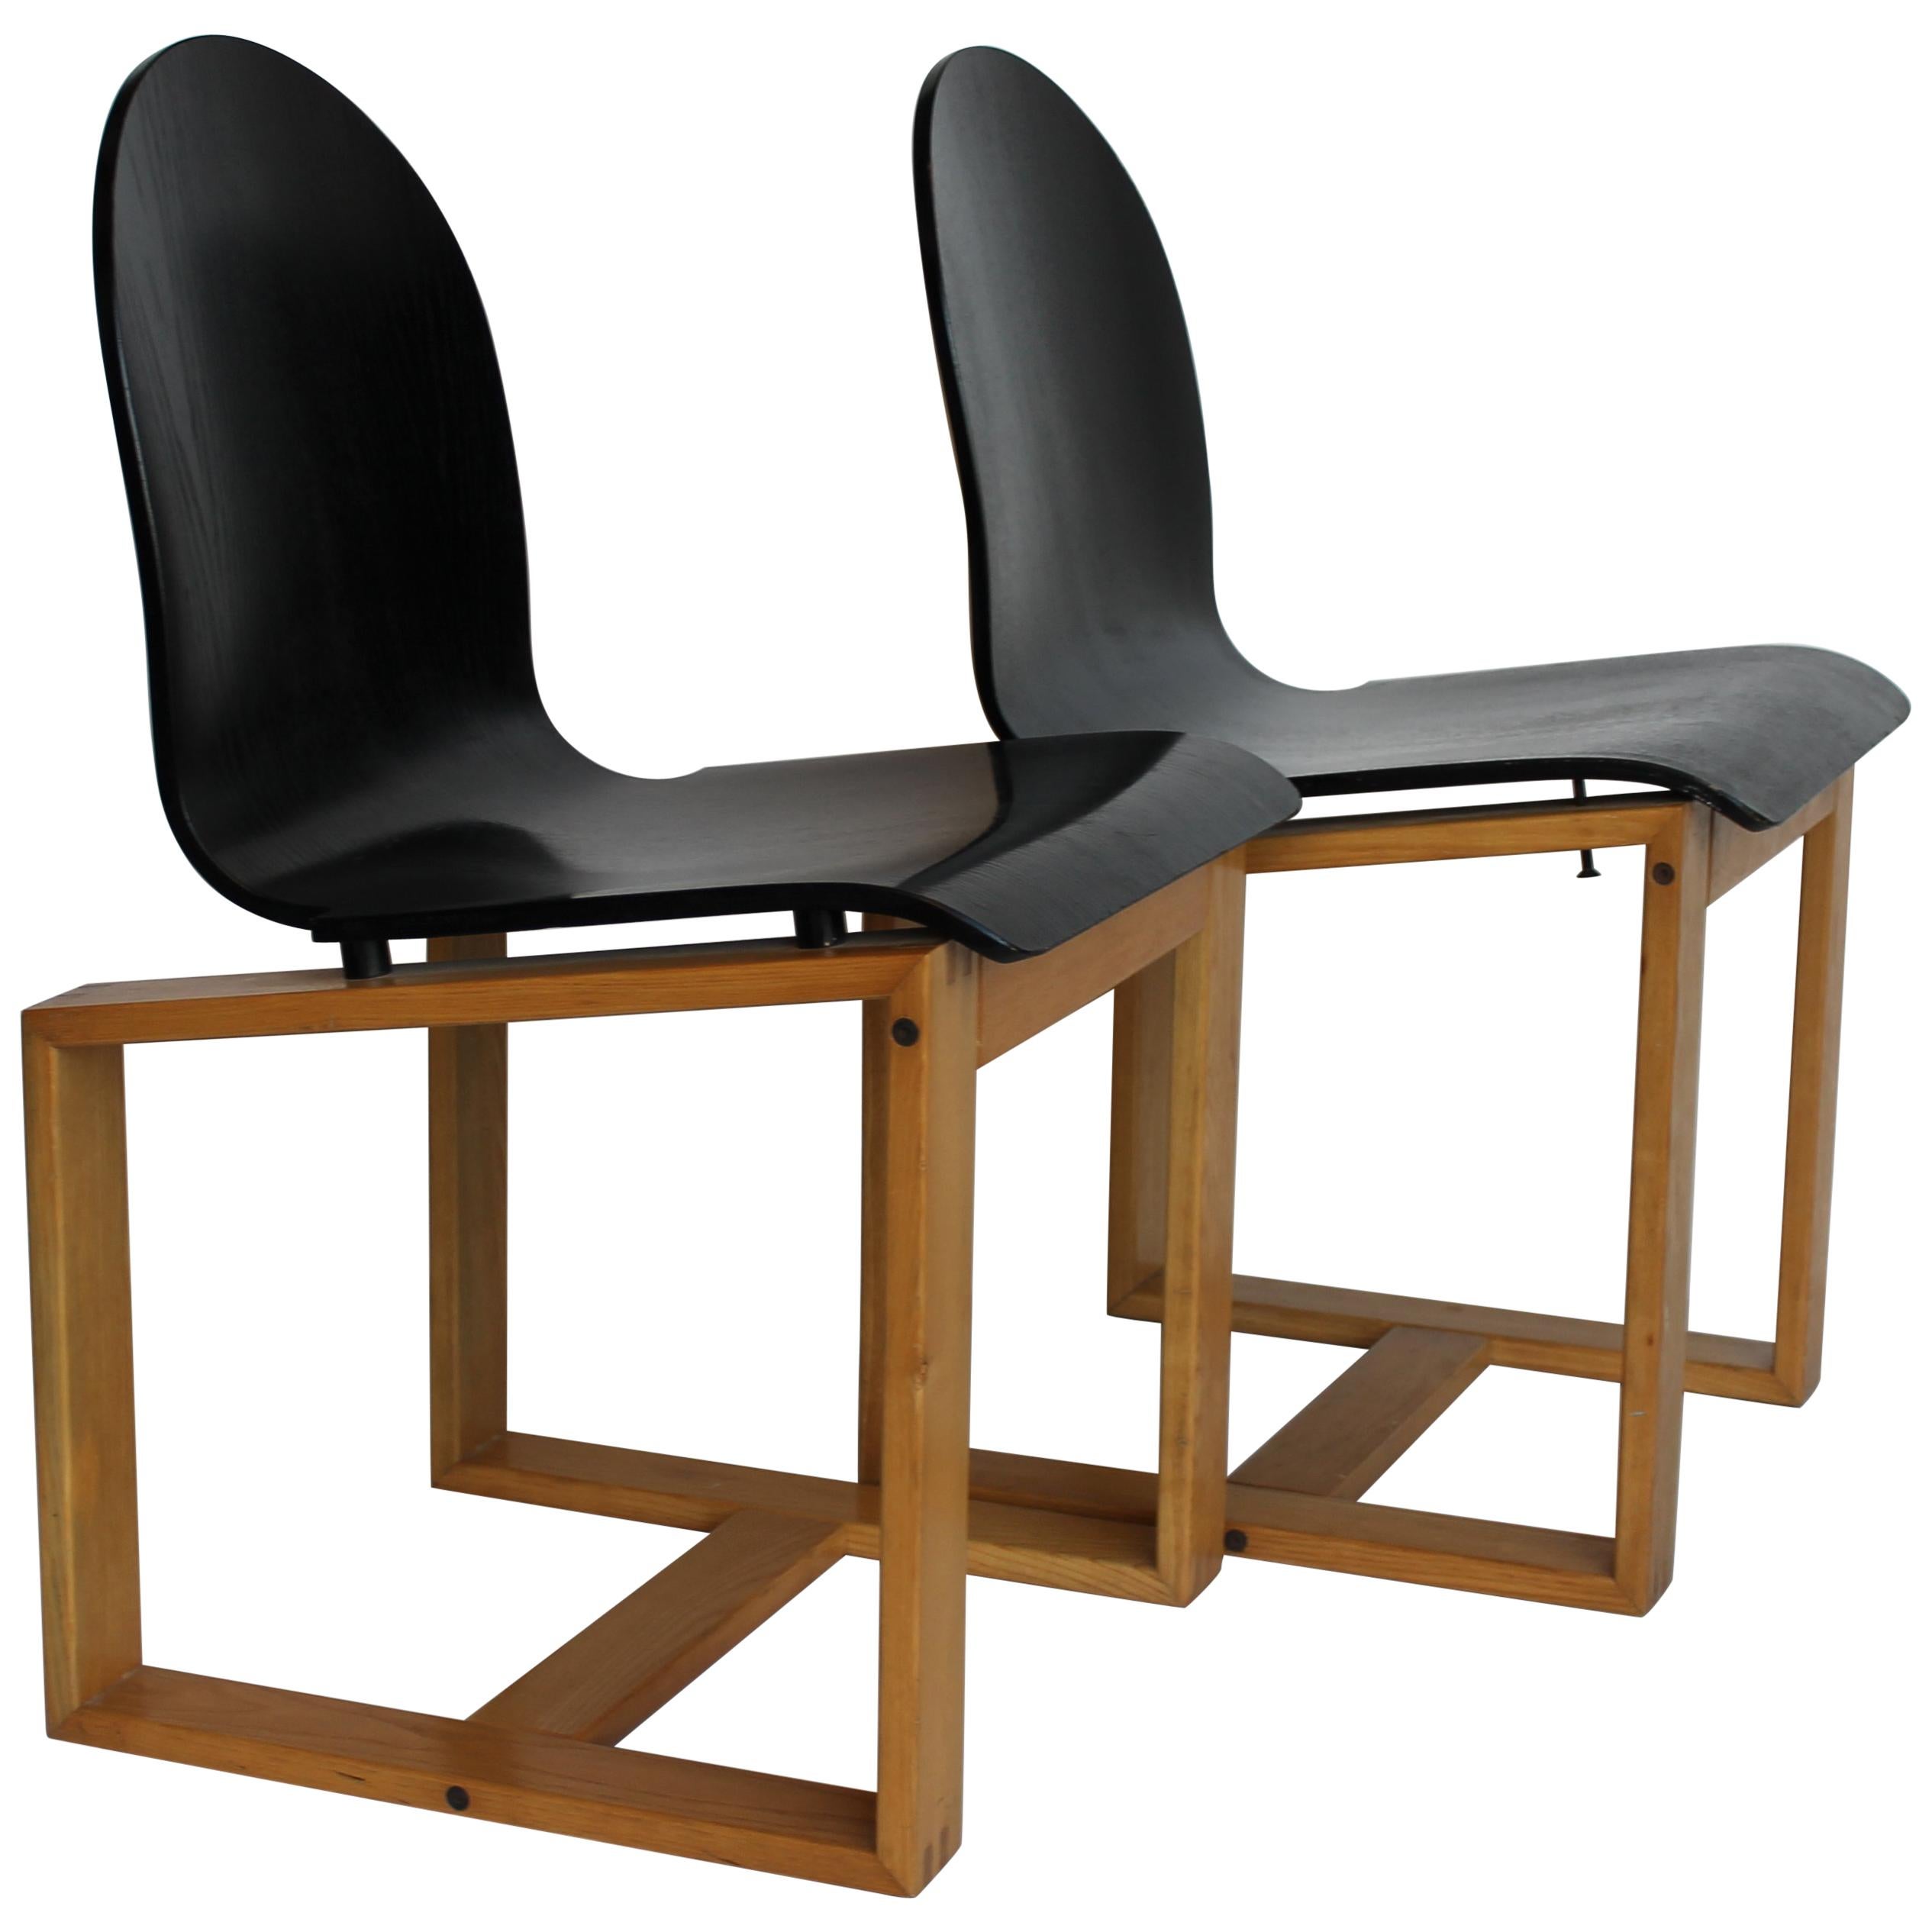 Pair of Mid-Century Italian Chairs, Cubic Wood Structure and Curved Seat, 1970s For Sale